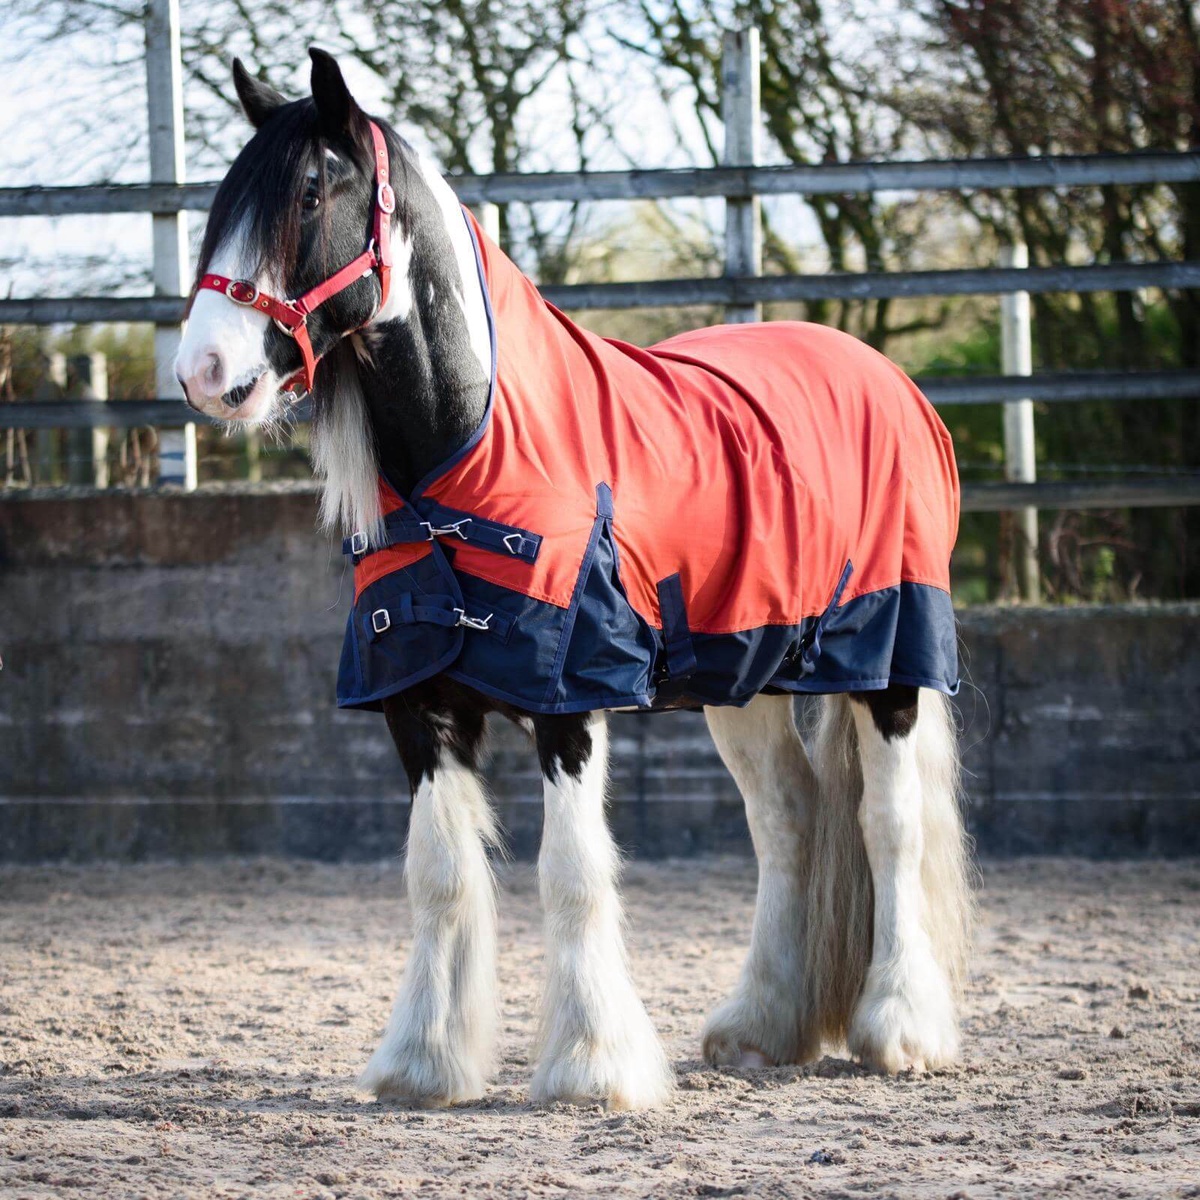 Can a Lightweight Turnout Rug Provide Sufficient Warmth and Protection for Horses During Mild Weather Conditions?